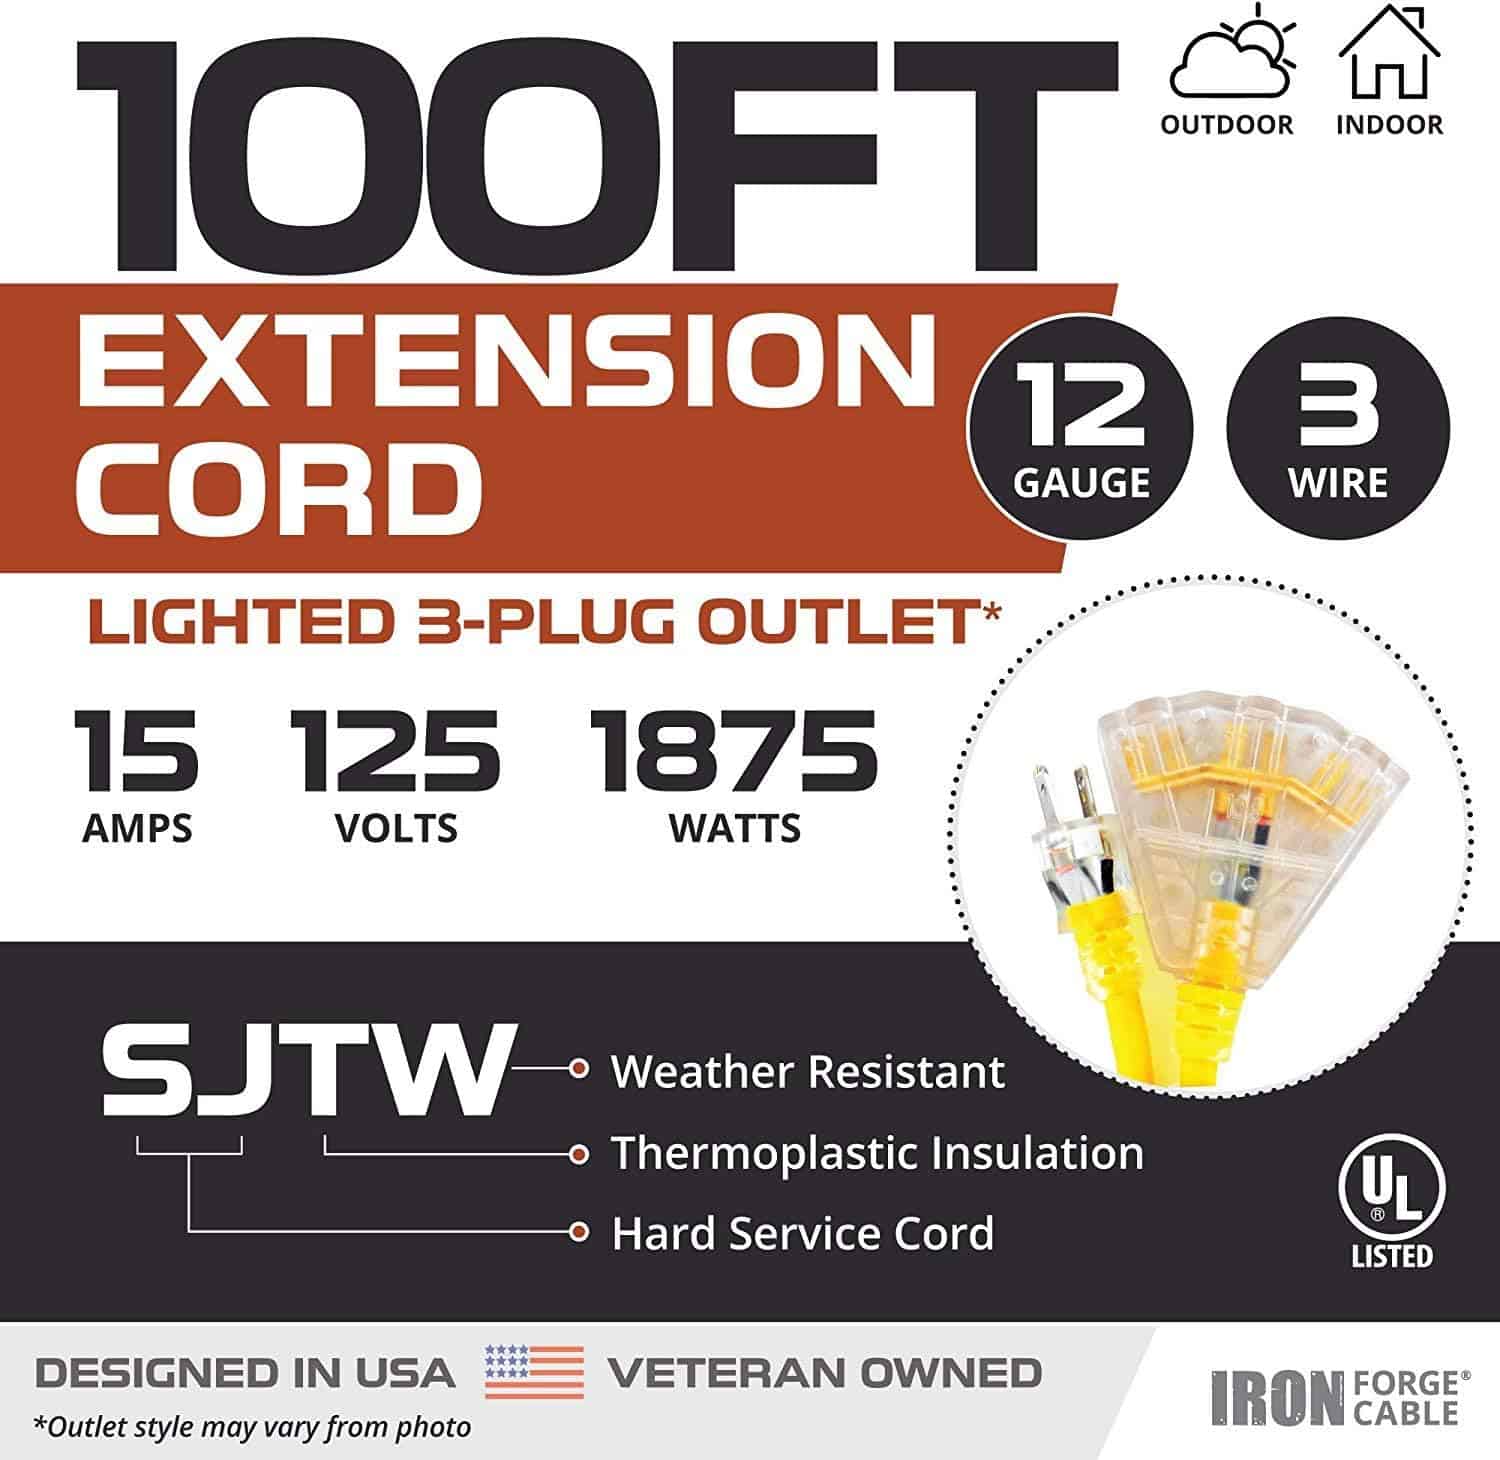 Iron-Forge-Cable-100ft-Outdoor-Extension-Cord-Lighted-with-3-Electrical-Power-Outlets-12-3-Gauge-SJTW-Heavy-Duty-Extension-Cable-Yellow-15-AMP-3-Pronged-with-Grounded-Plug-for-Improved-Safety